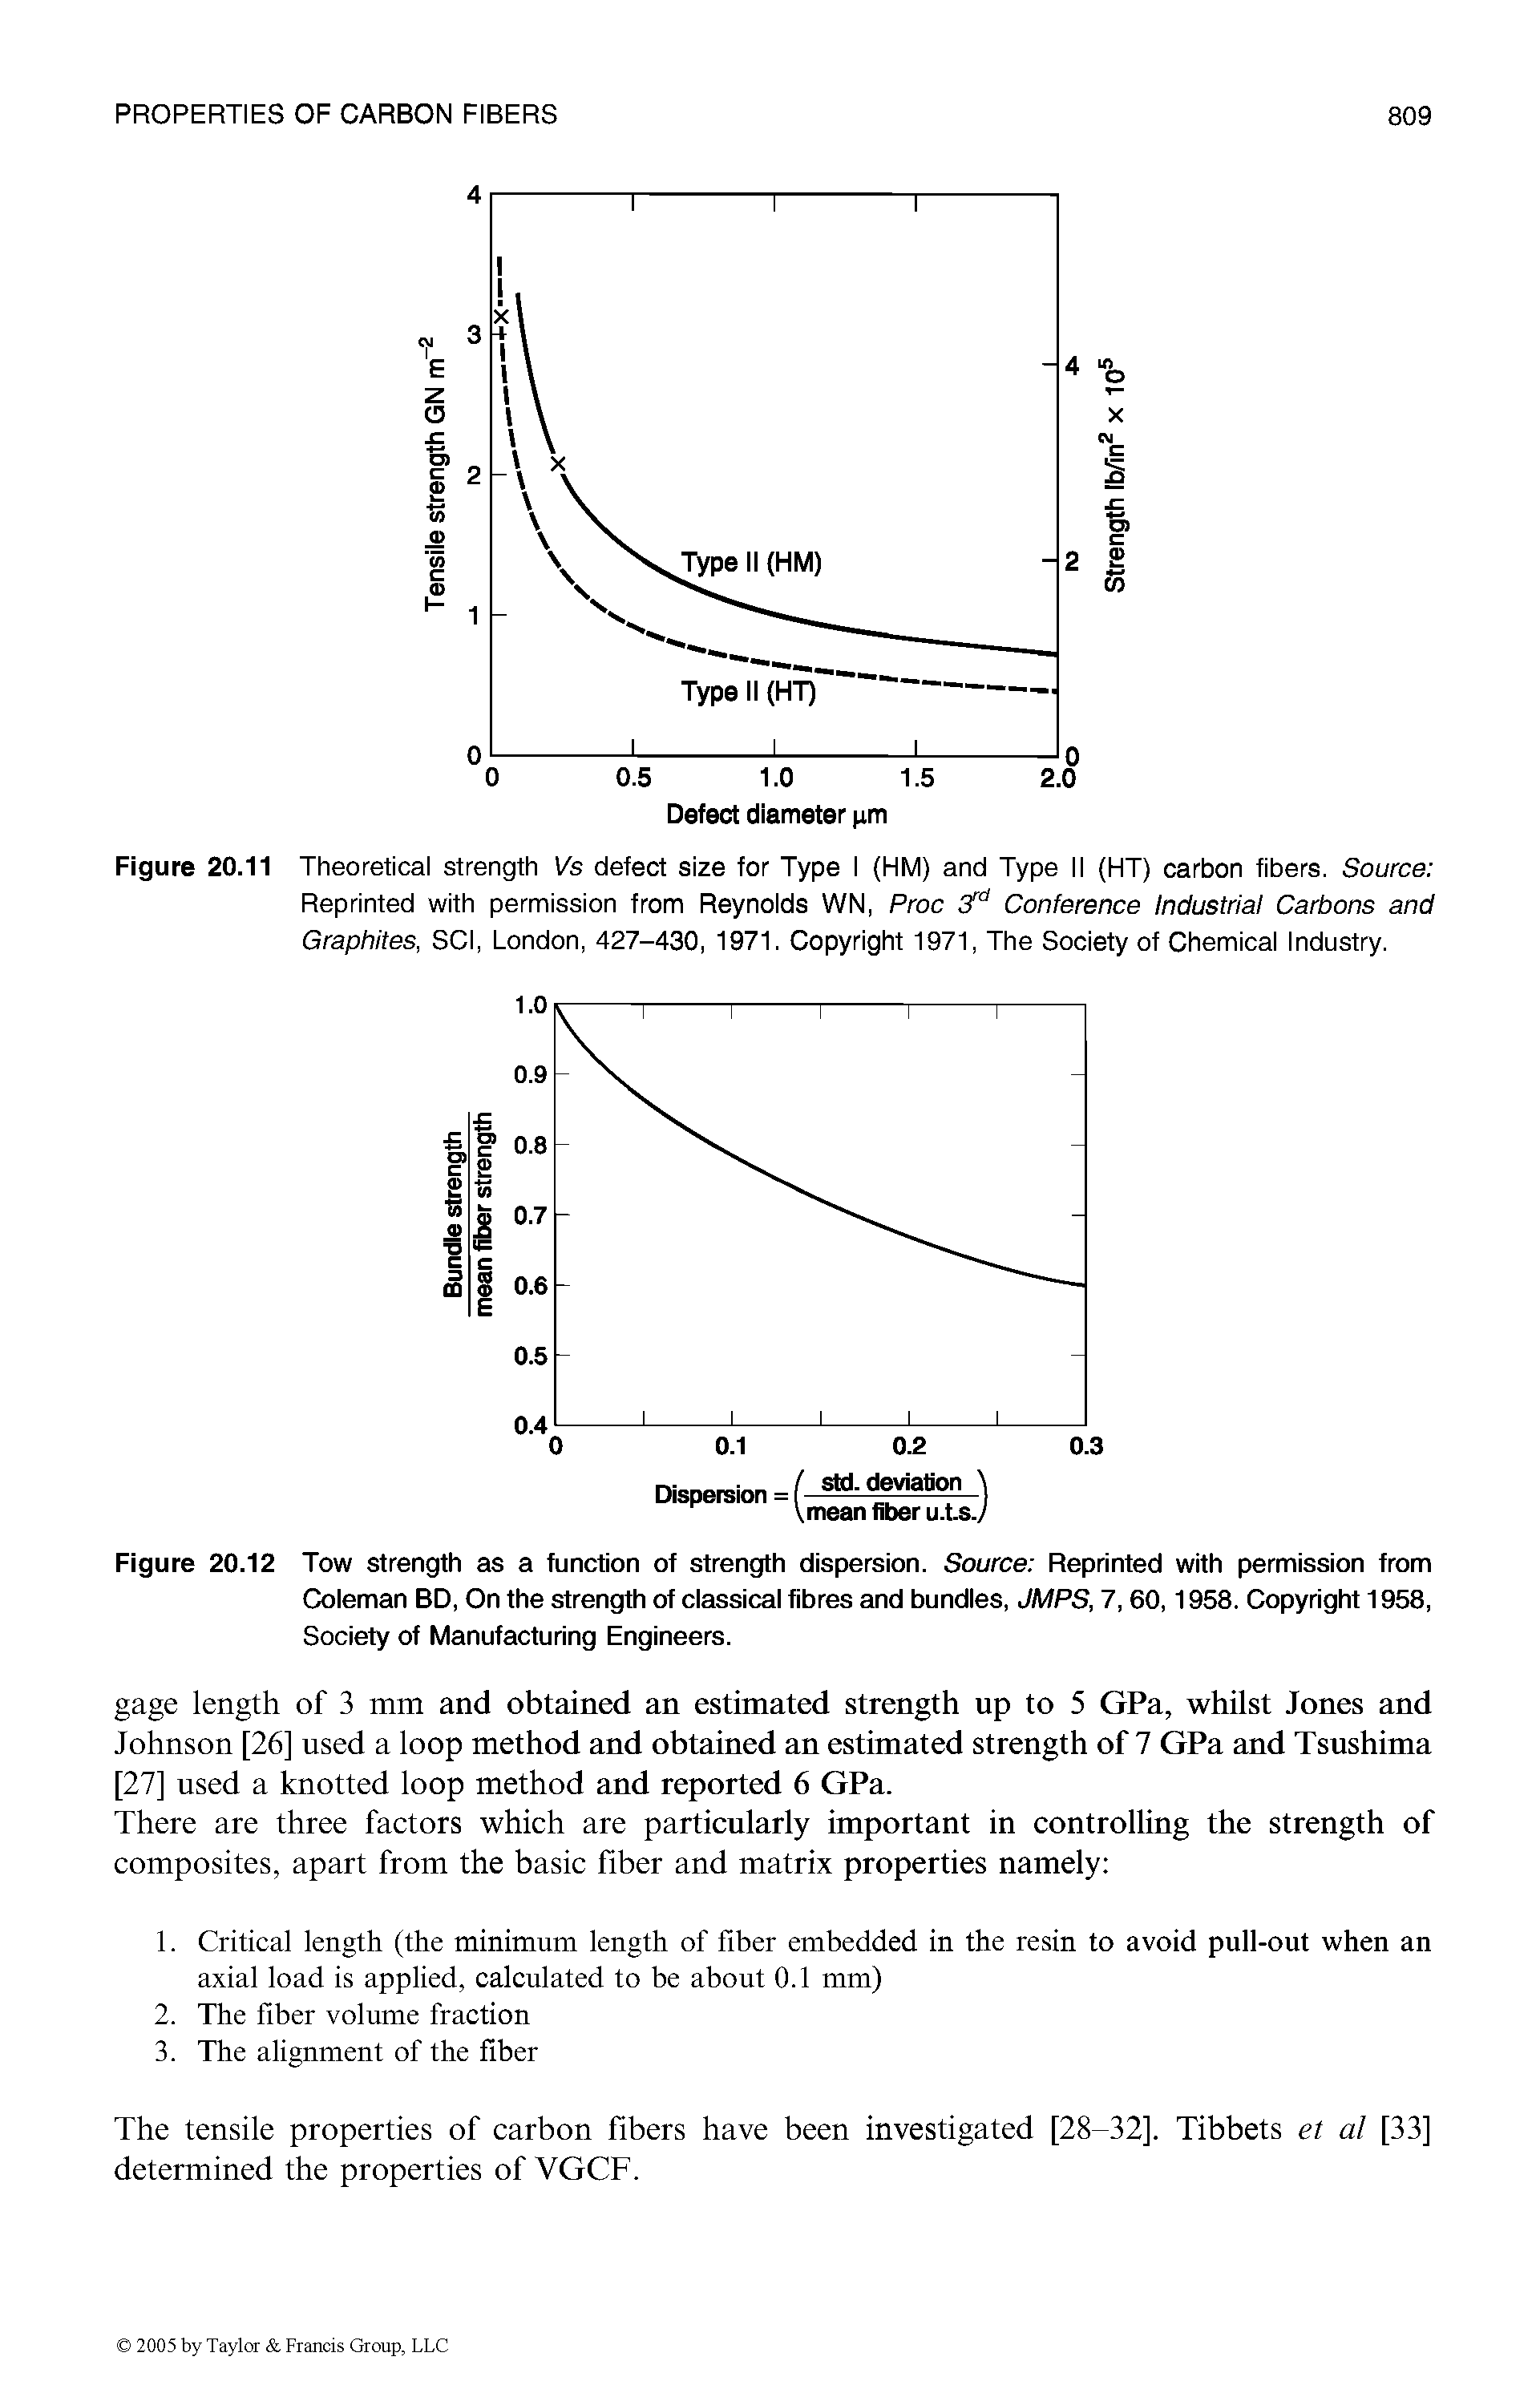 Figure 20.12 Tow strength as a function of strength dispersion. Source Reprinted with permission from Coleman BD, On the strength of classical fibres and bundles, JMPS, 7,60,1958. Copyright 1958, Society of Manufacturing Engineers.